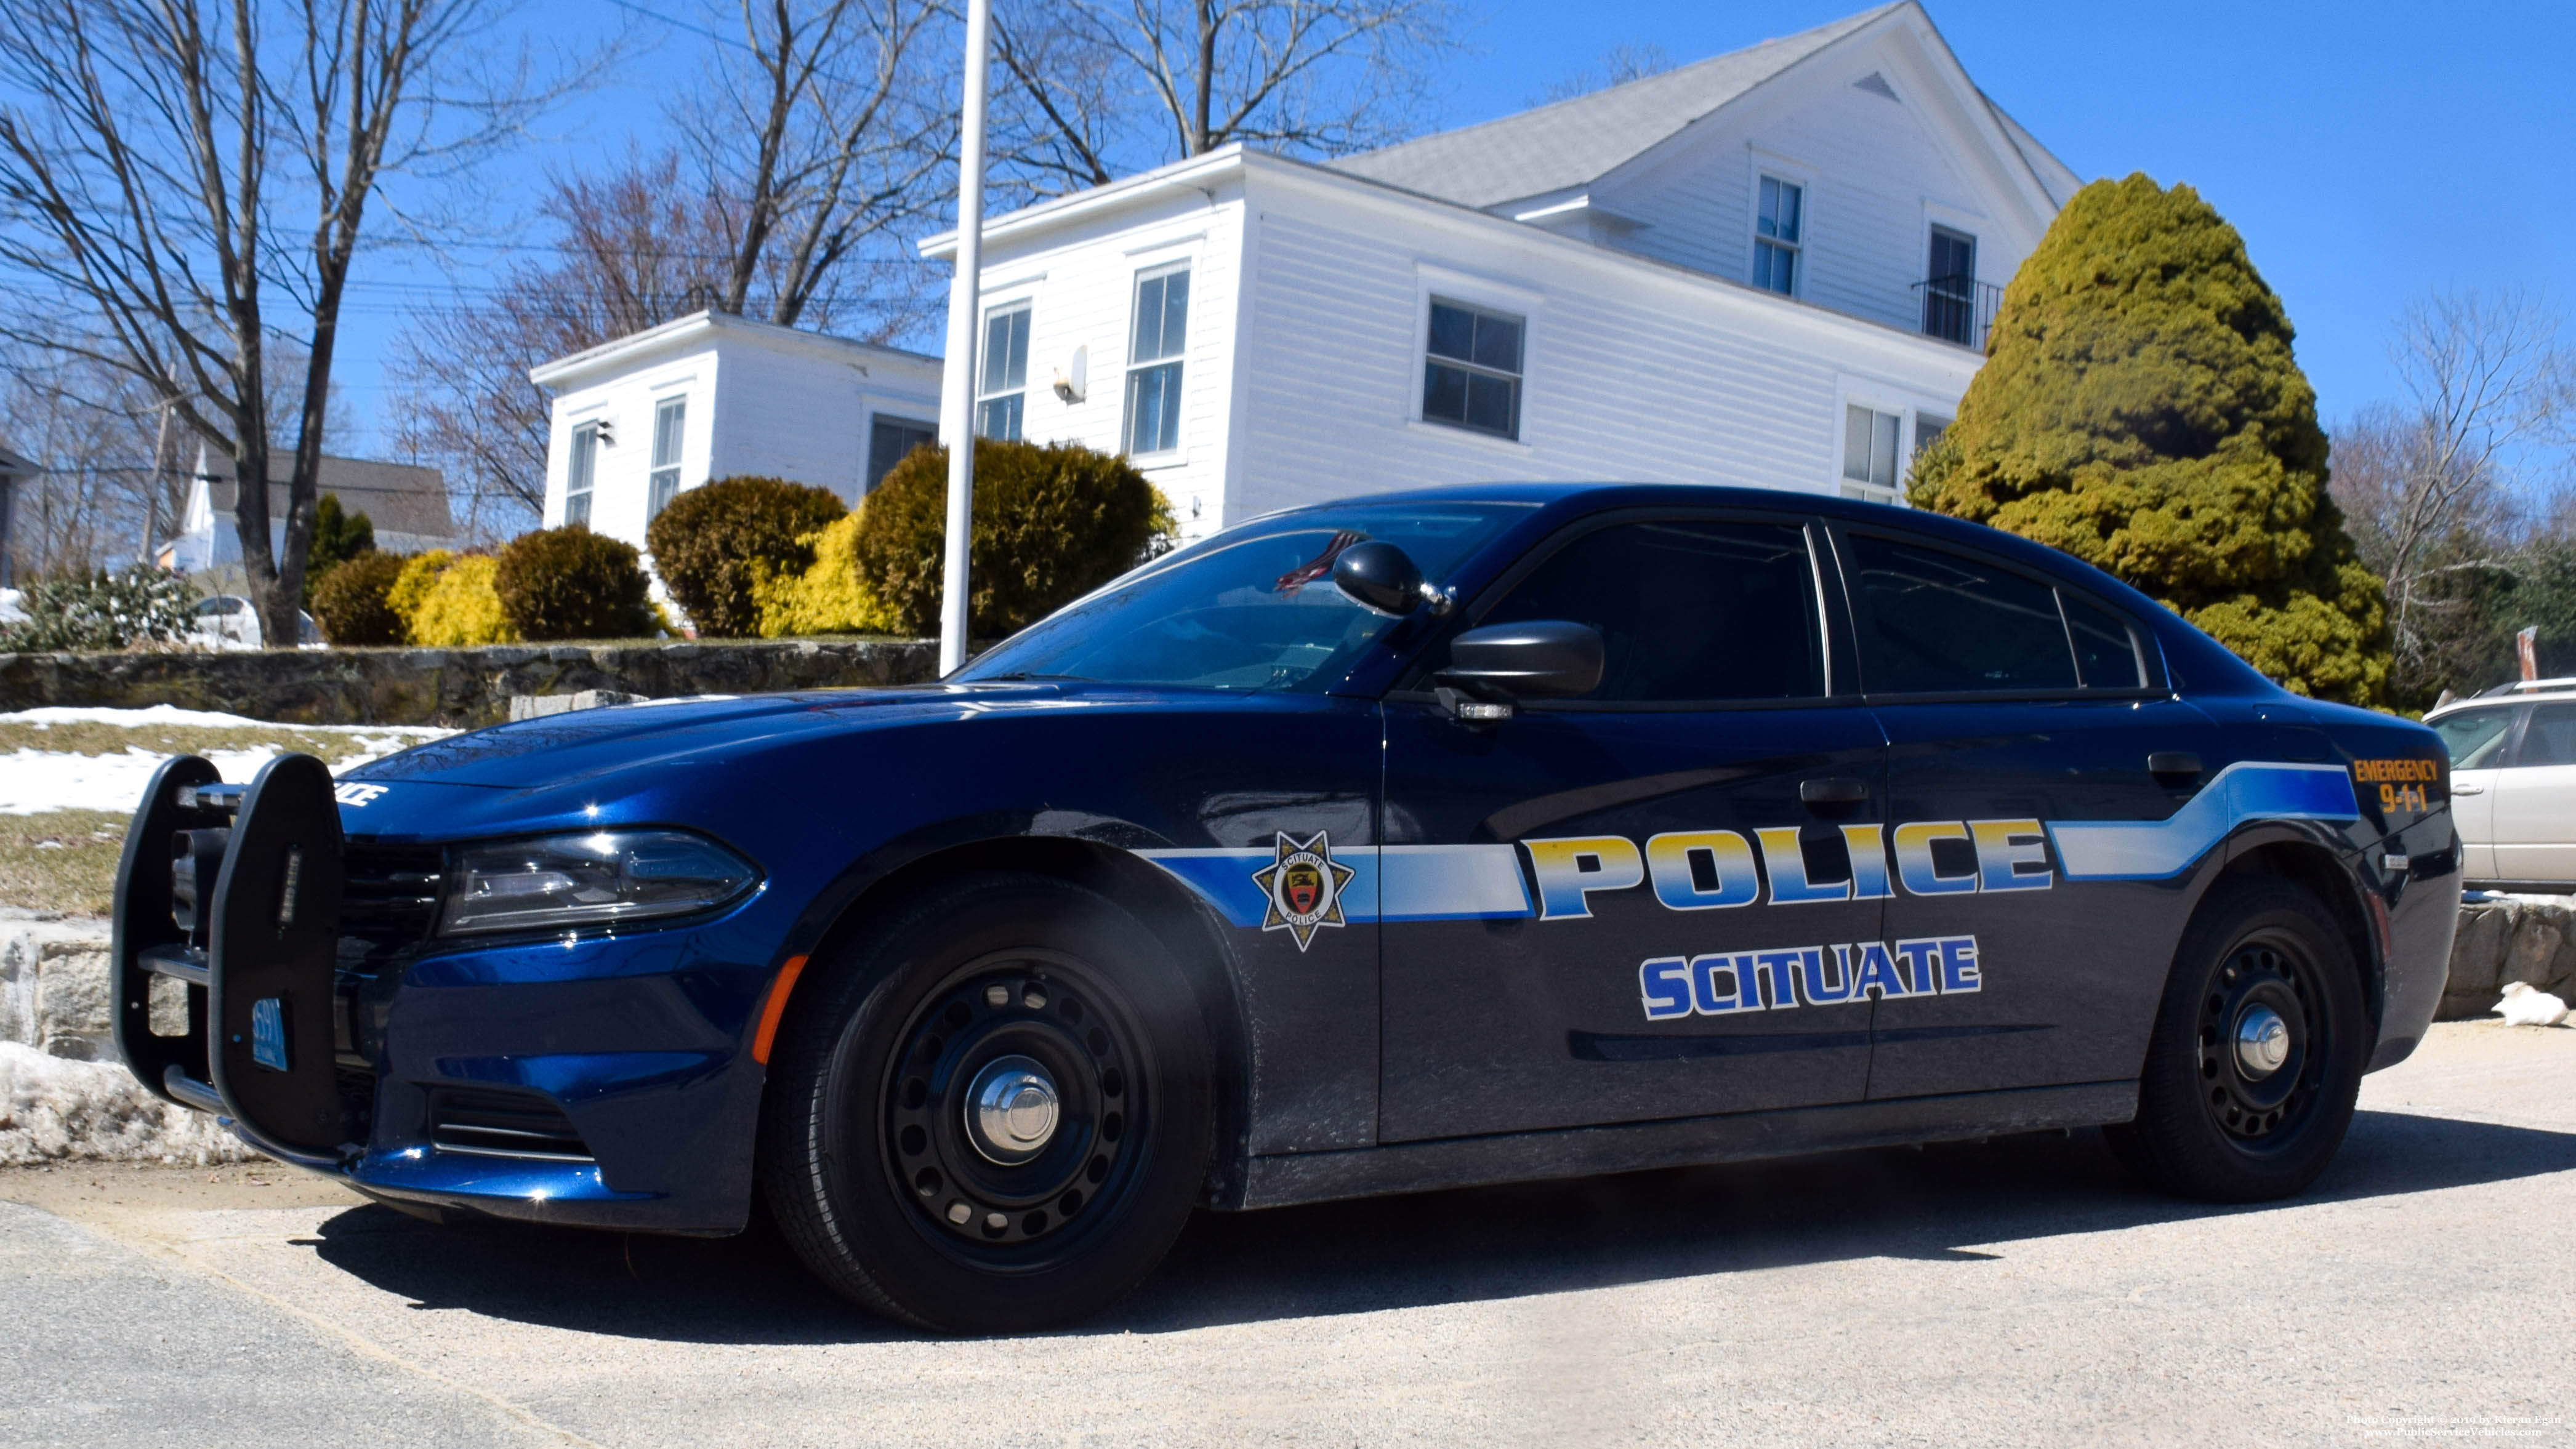 A photo  of Scituate Police
            Cruiser 3591, a 2018 Dodge Charger             taken by Kieran Egan